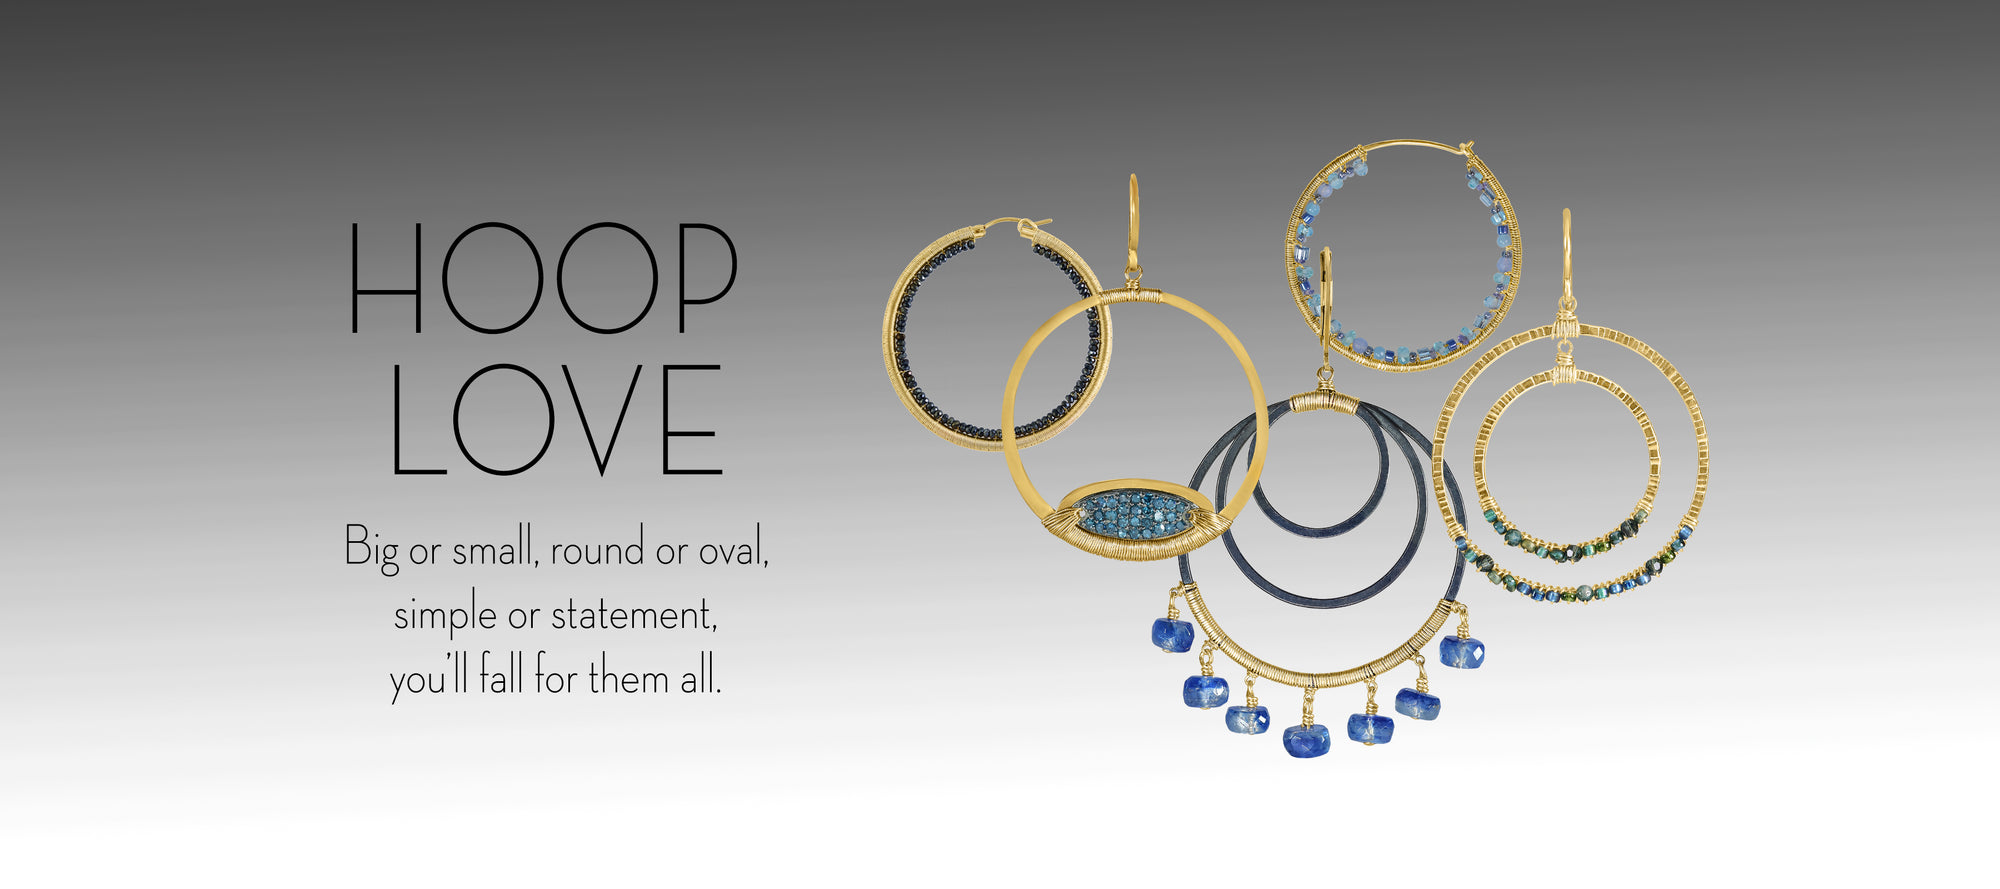 Hoop Love. Big or small, round or oval, simple or statement you'll fall for them all!